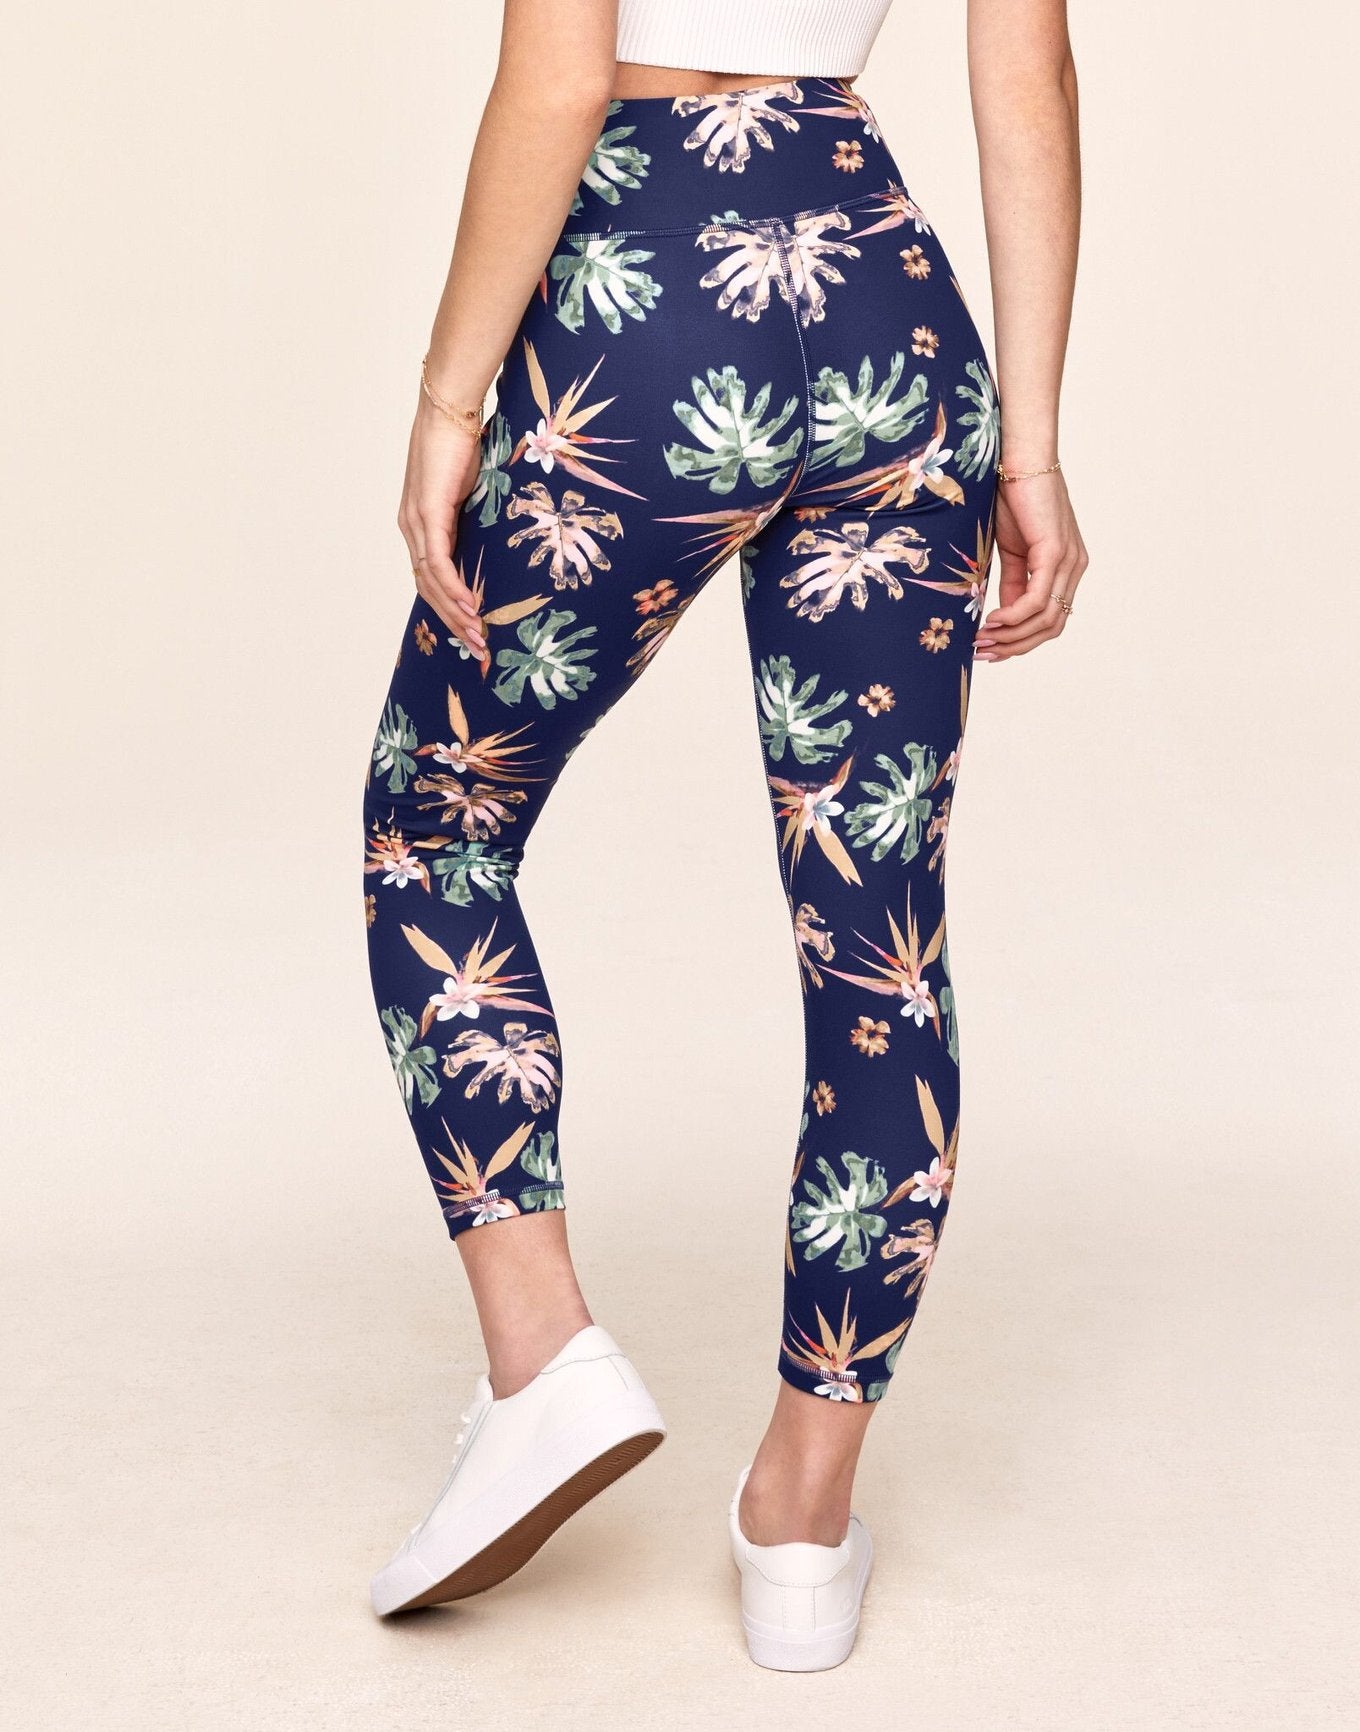 Walkpop Cora Cozy 7/8 Super-Soft Printed 7/8 Legging in color Tropical C01 and shape legging